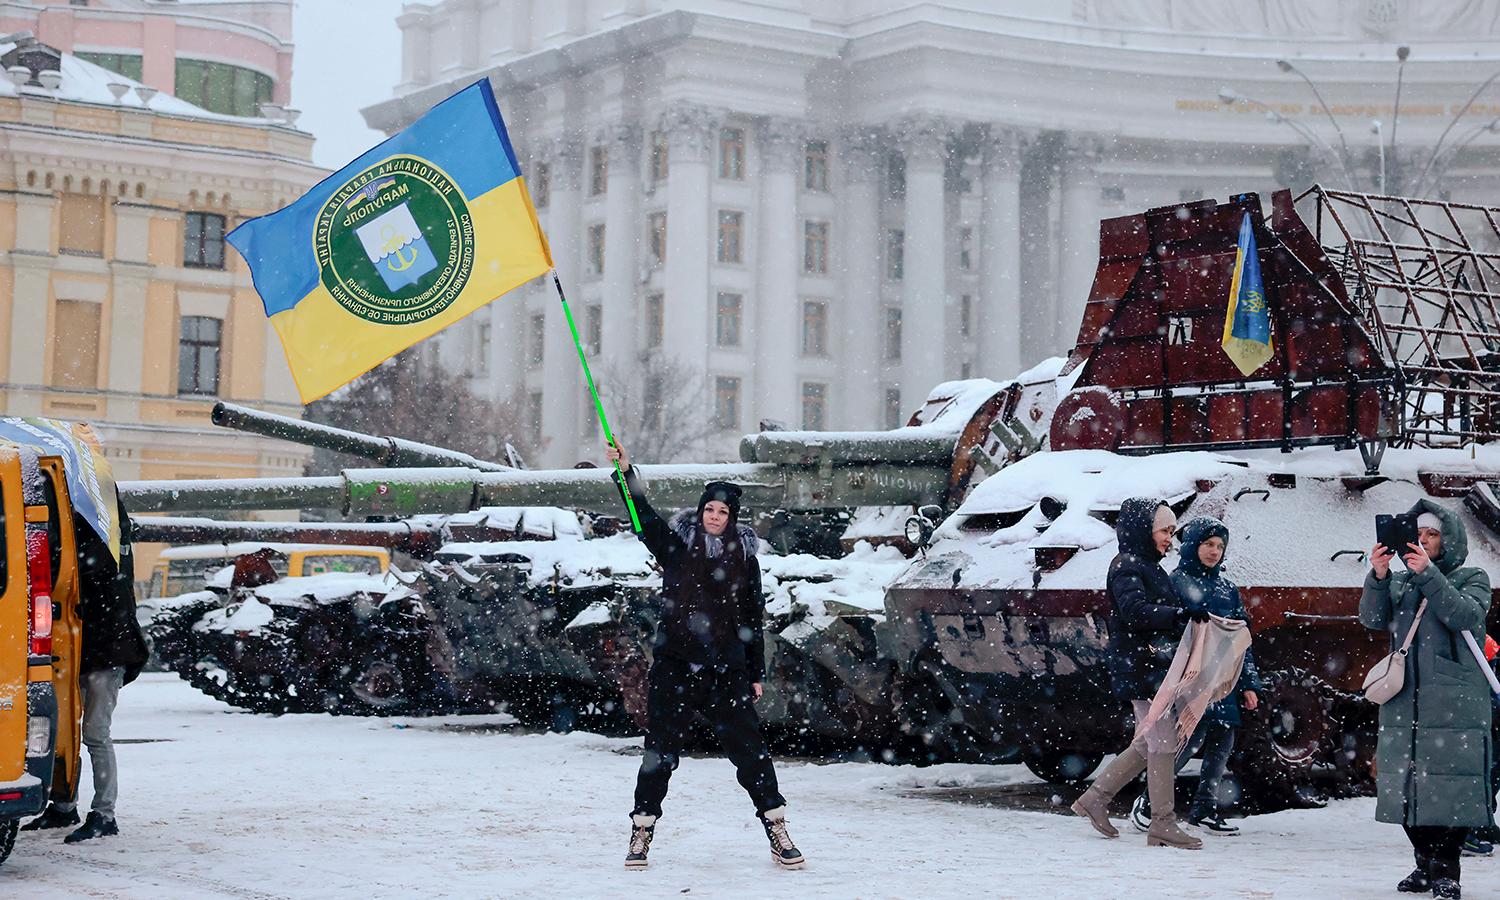 A protester waves a Ukrainian flag in Kyiv